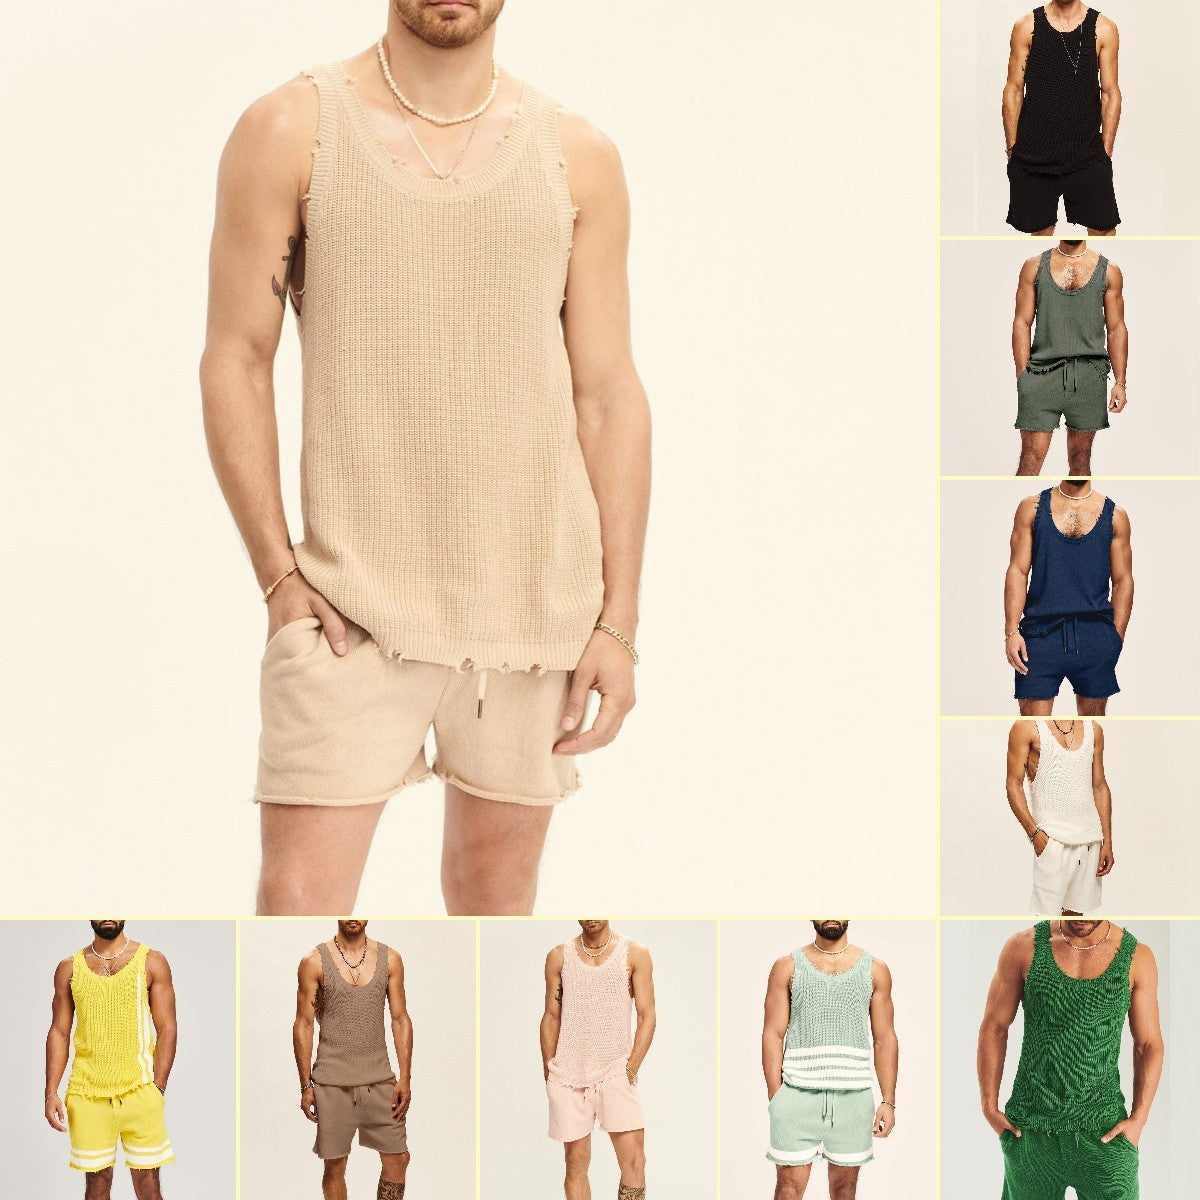 Men's Two-piece Knitted Sleeveless Tank Top Shorts